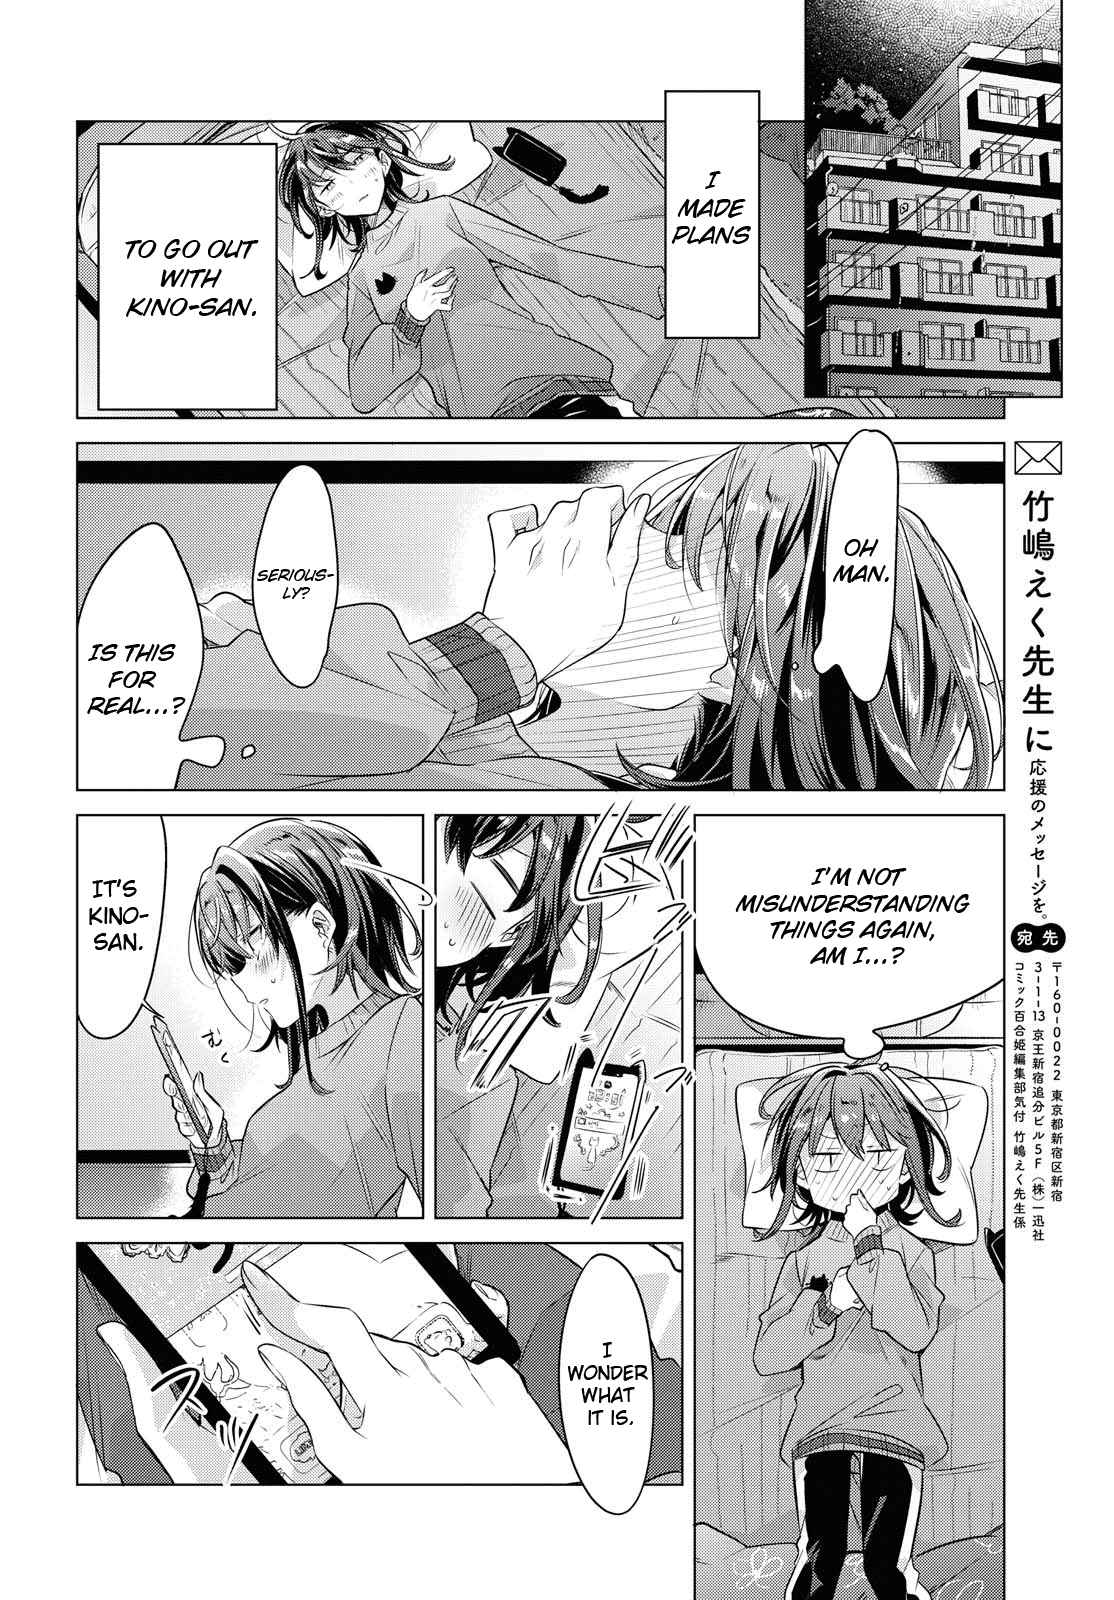 Whispering You a Love Song Vol. 1 Ch. 4 On a rainy day, in the classroom.